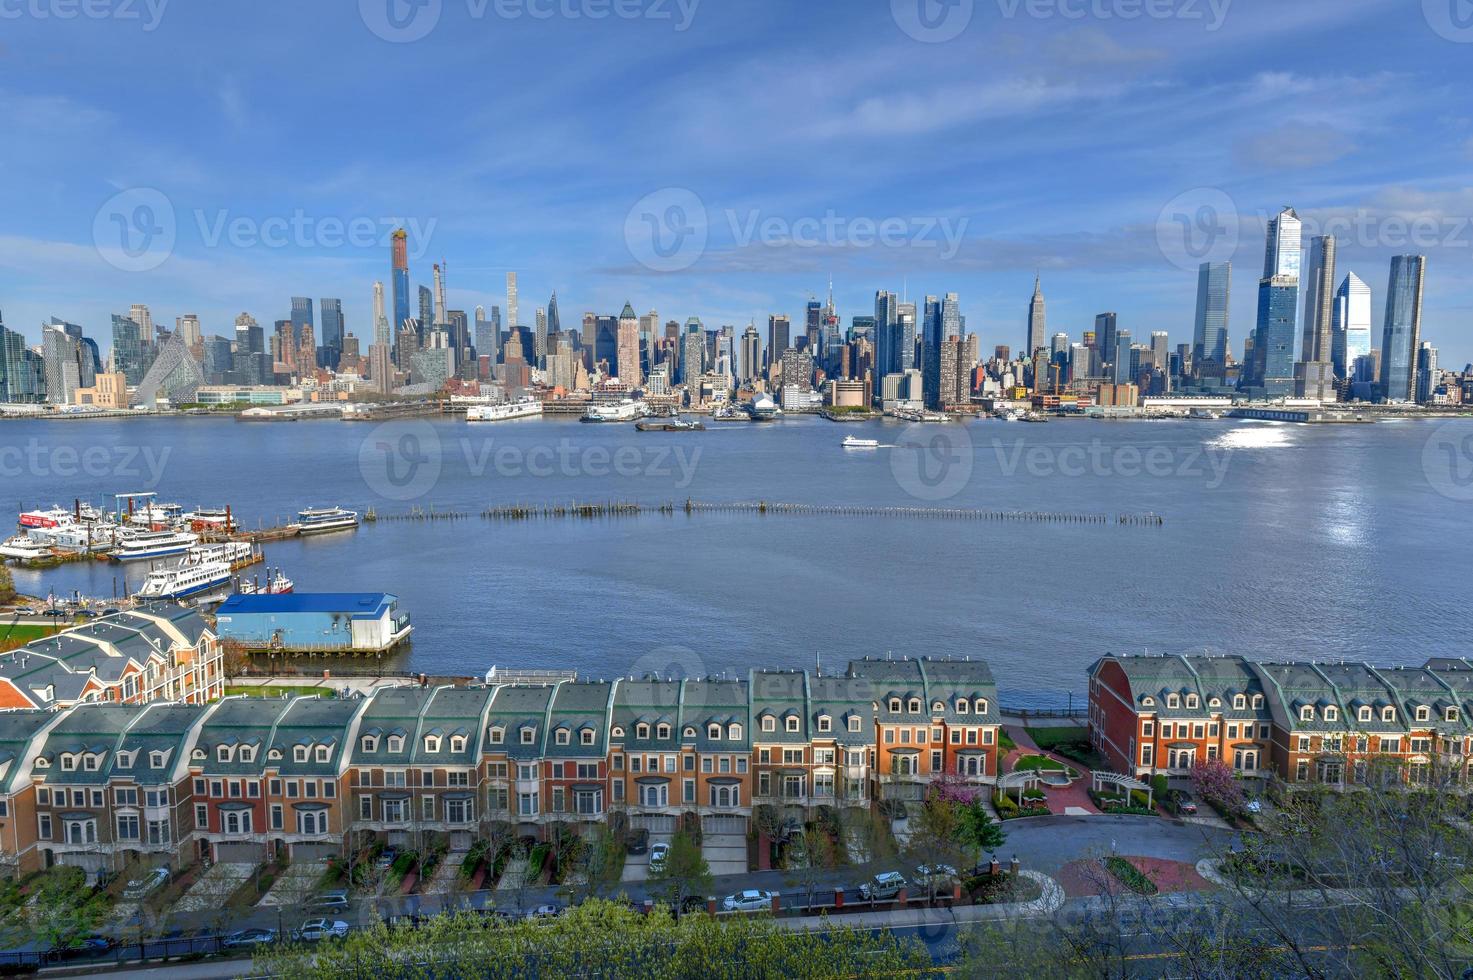 New York City - April 21, 2019 -  Panoramic view of the New York City skyline from Hamilton Park, Weehawken, New Jersey. photo